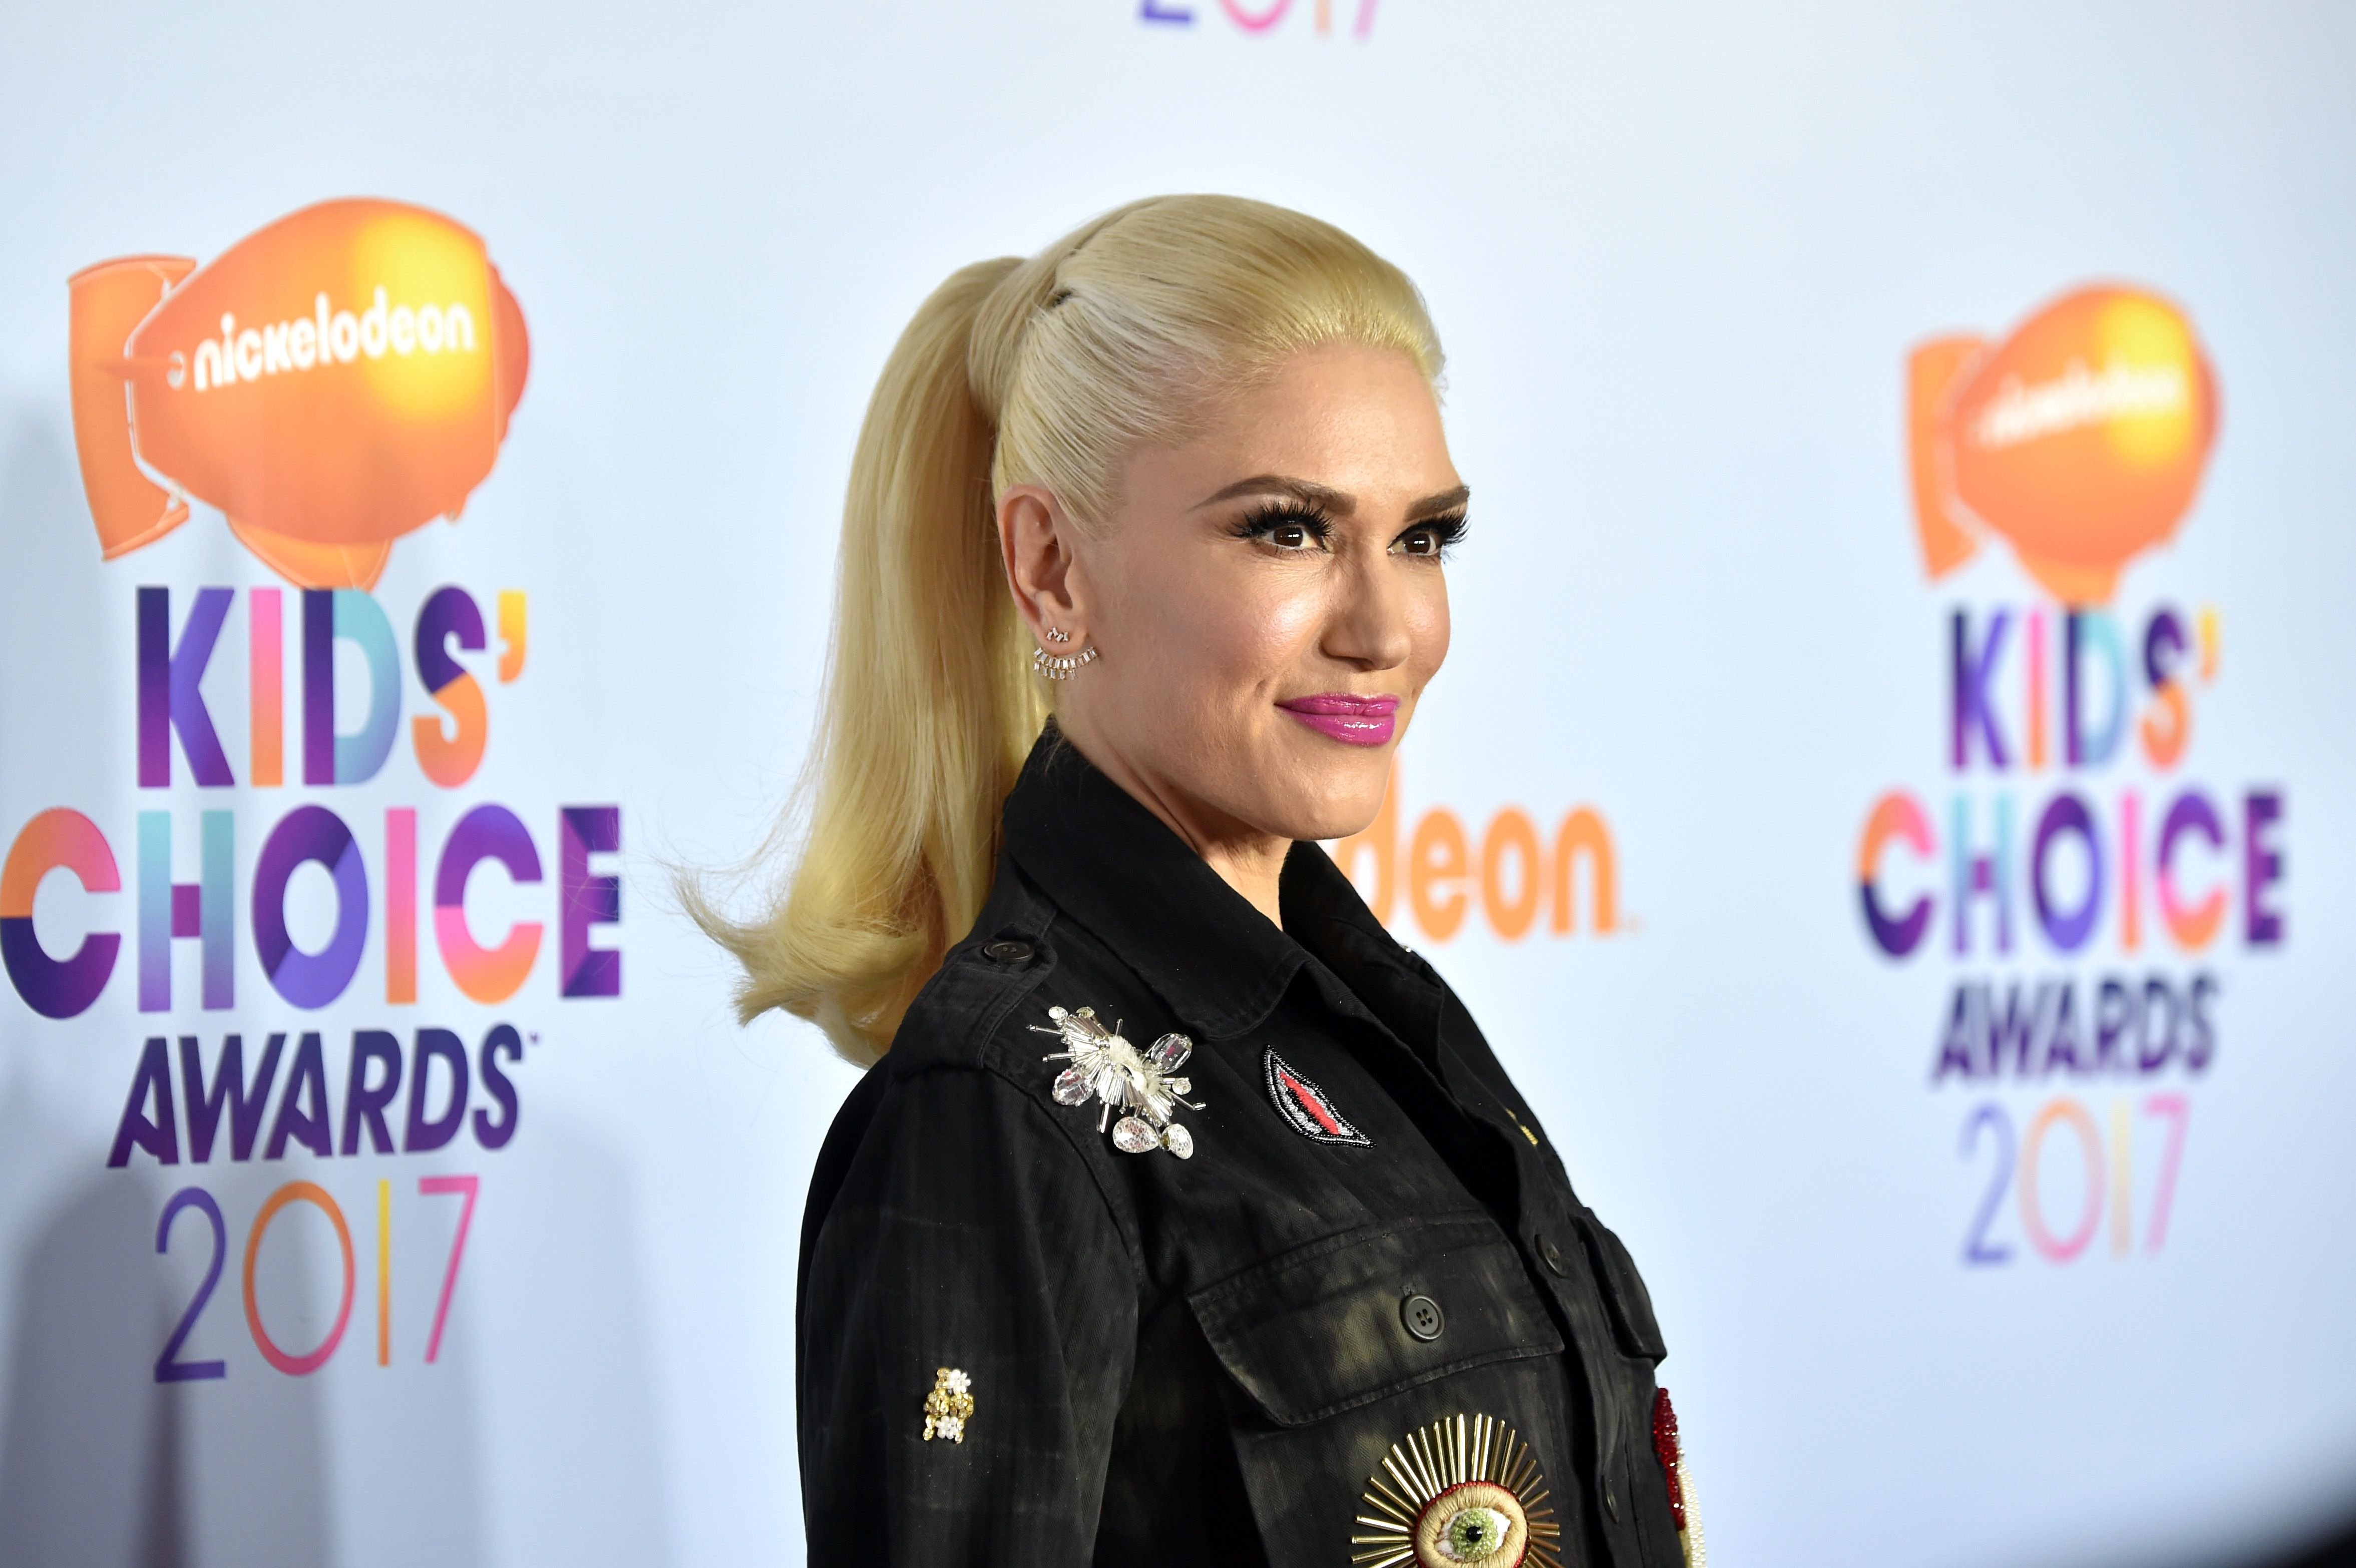 Gwen Stefani at Nickelodeon's 2017 Kids' Choice Awards at USC Galen Center on March 11, 2017 in Los Angeles, California. | Photo: Getty Images